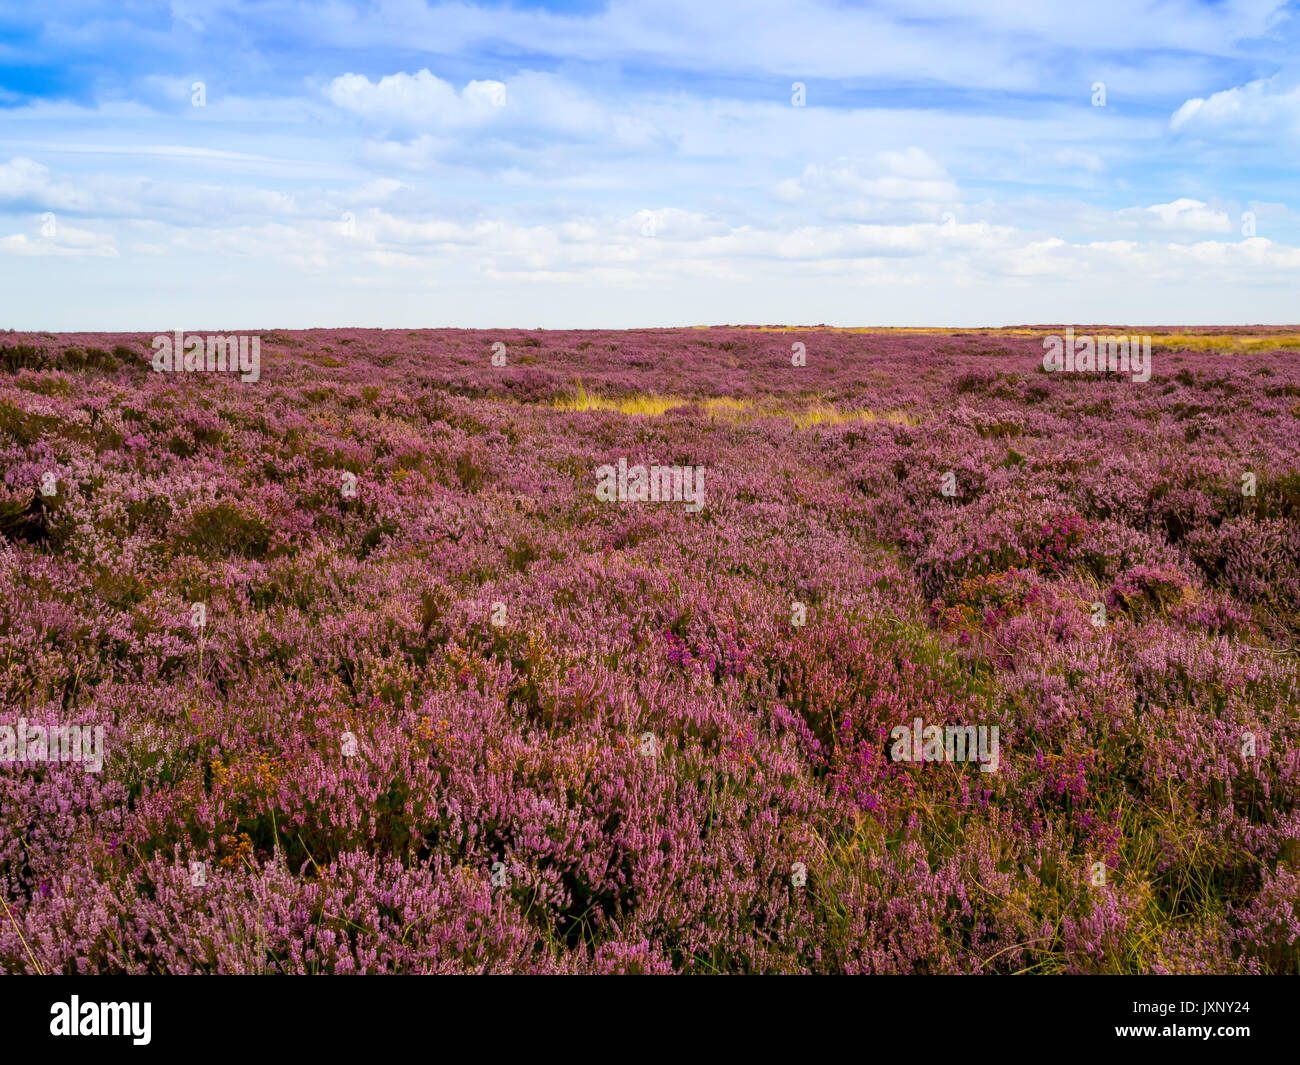 Calluna vulgaris common heather or Ling, in full bloom at  Danby,  North Yorkshire Moors National Park mid August Stock Photo